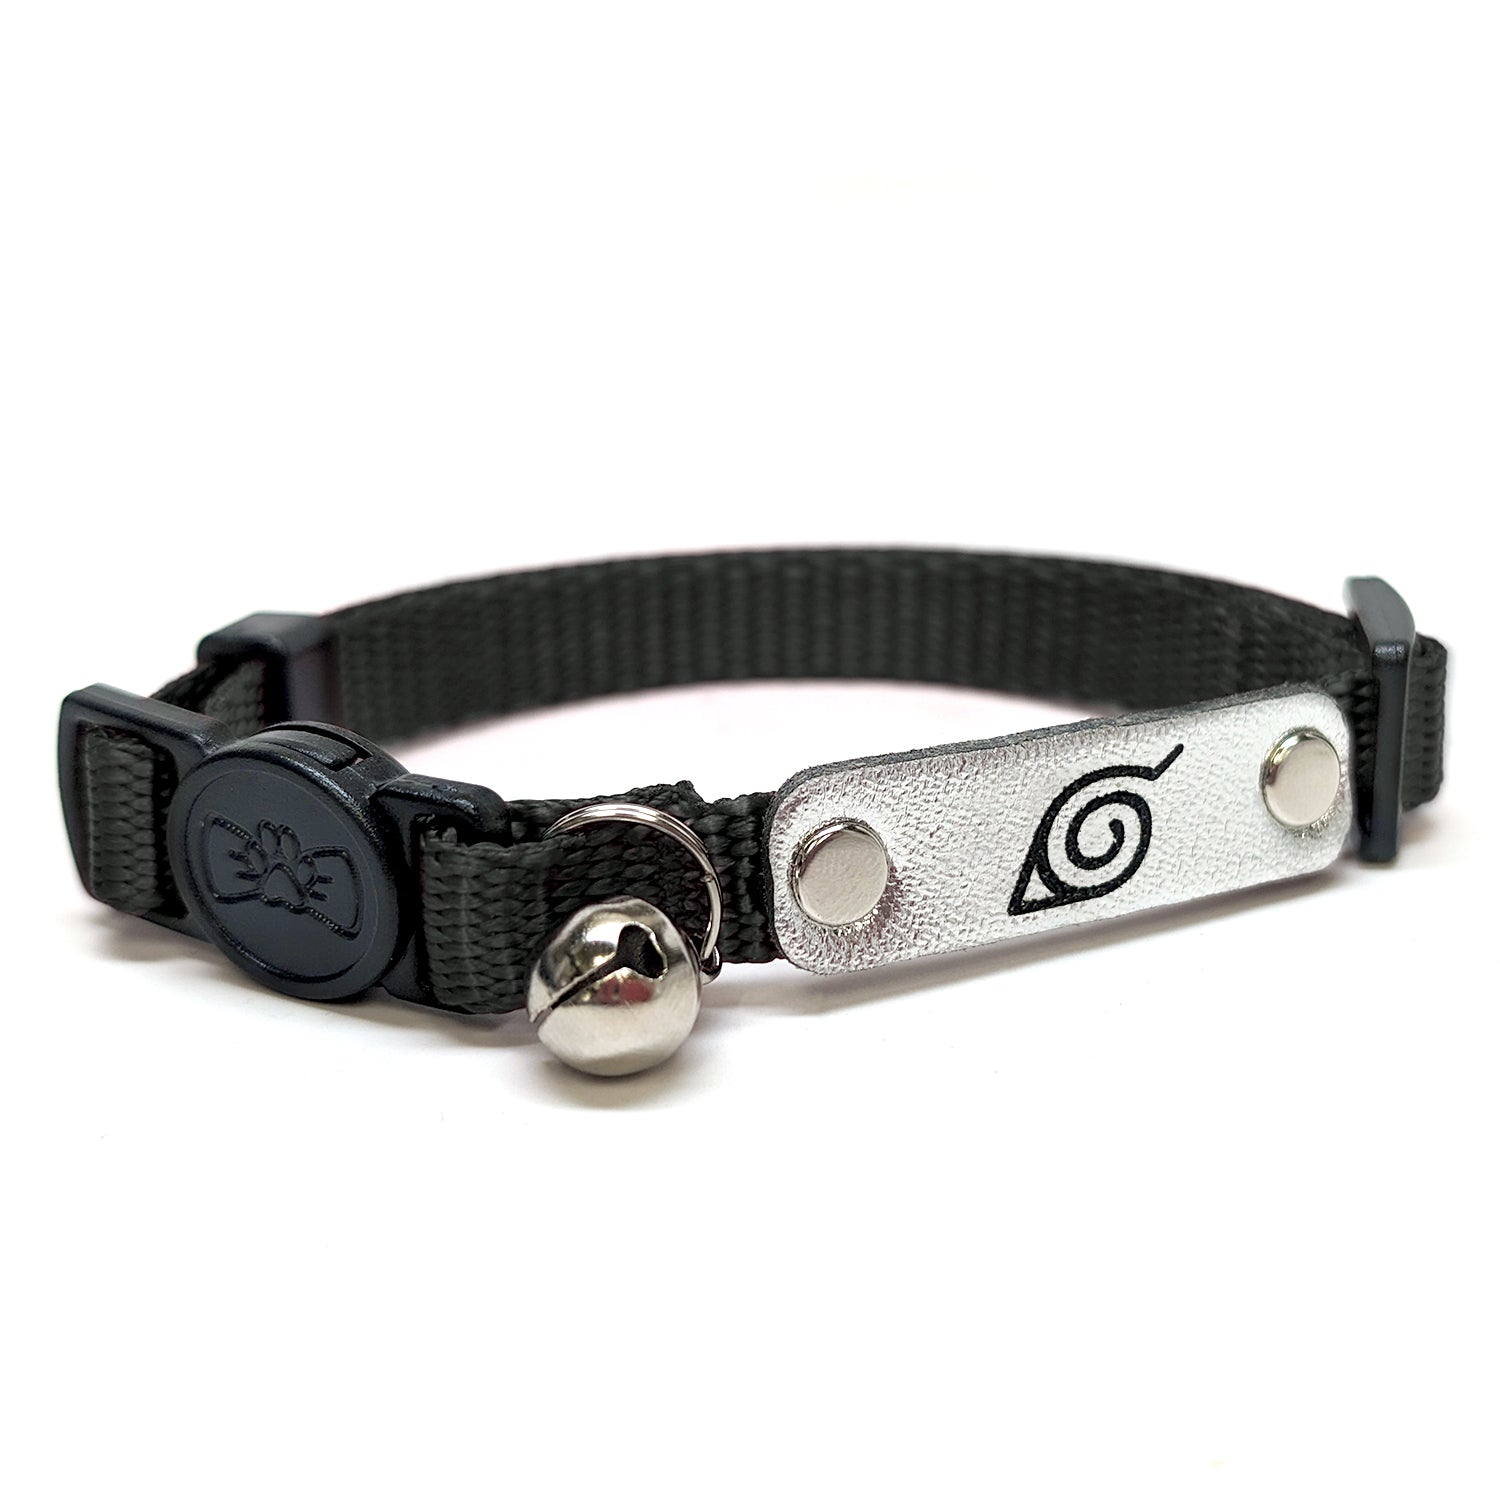 Naruto Shippuden x Pawsonify - Officially Licensed Ninja Collar (Black) for Cats #size_Cat: 8.5-12